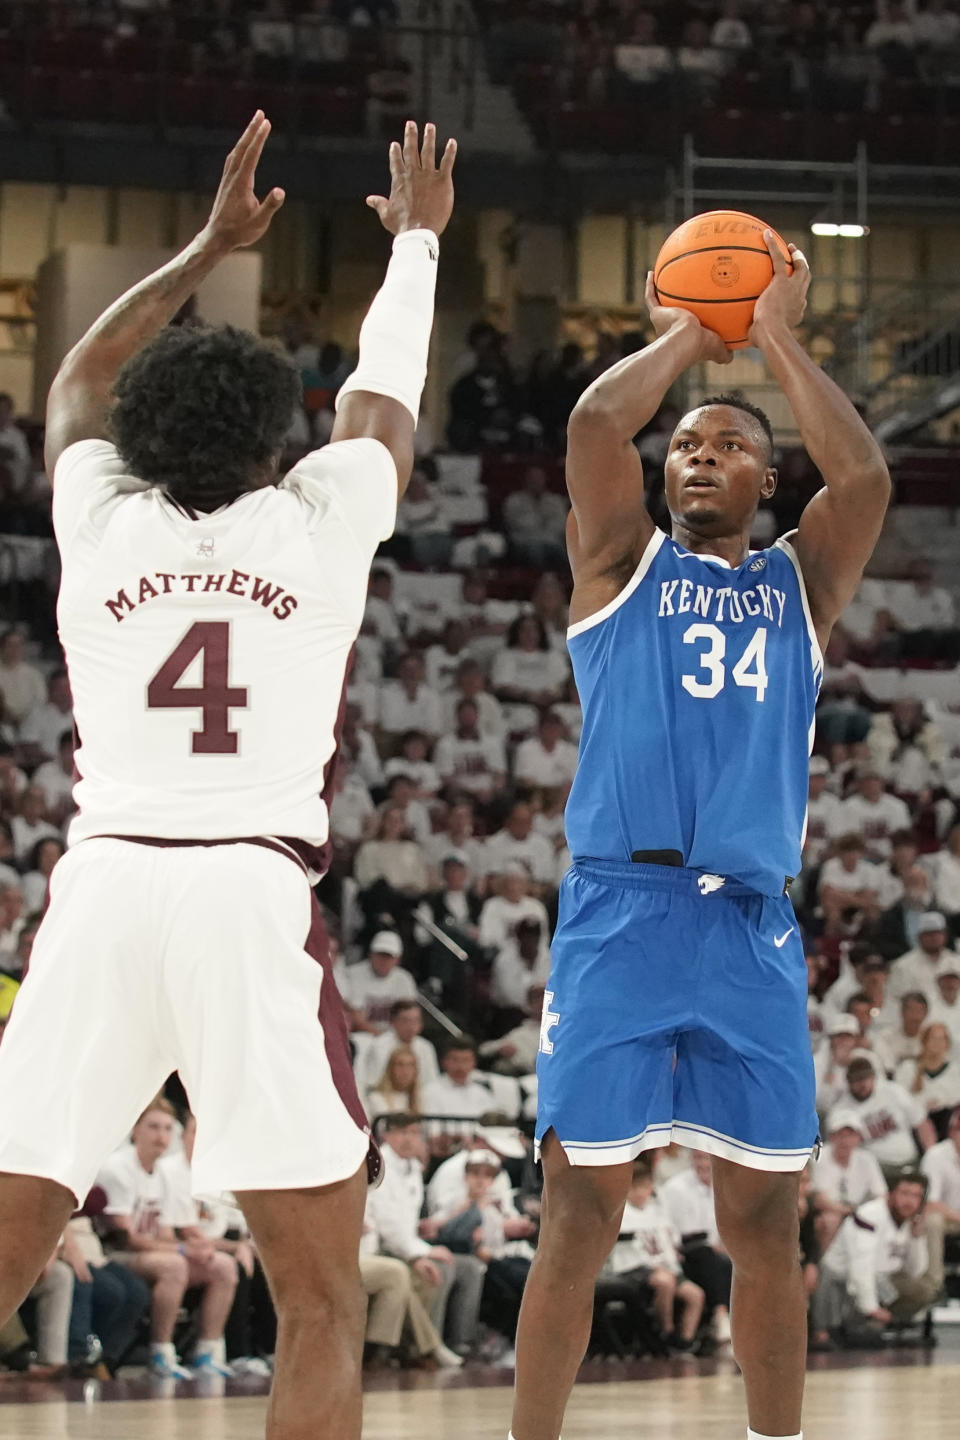 Kentucky forward Oscar Tshiebwe (34) shoots a basket over Mississippi State guard Cameron Matthews (4) during the first half of an NCAA college basketball game in Starkville, Miss., Wednesday, Feb. 15, 2023. (AP Photo/Rogelio V. Solis)